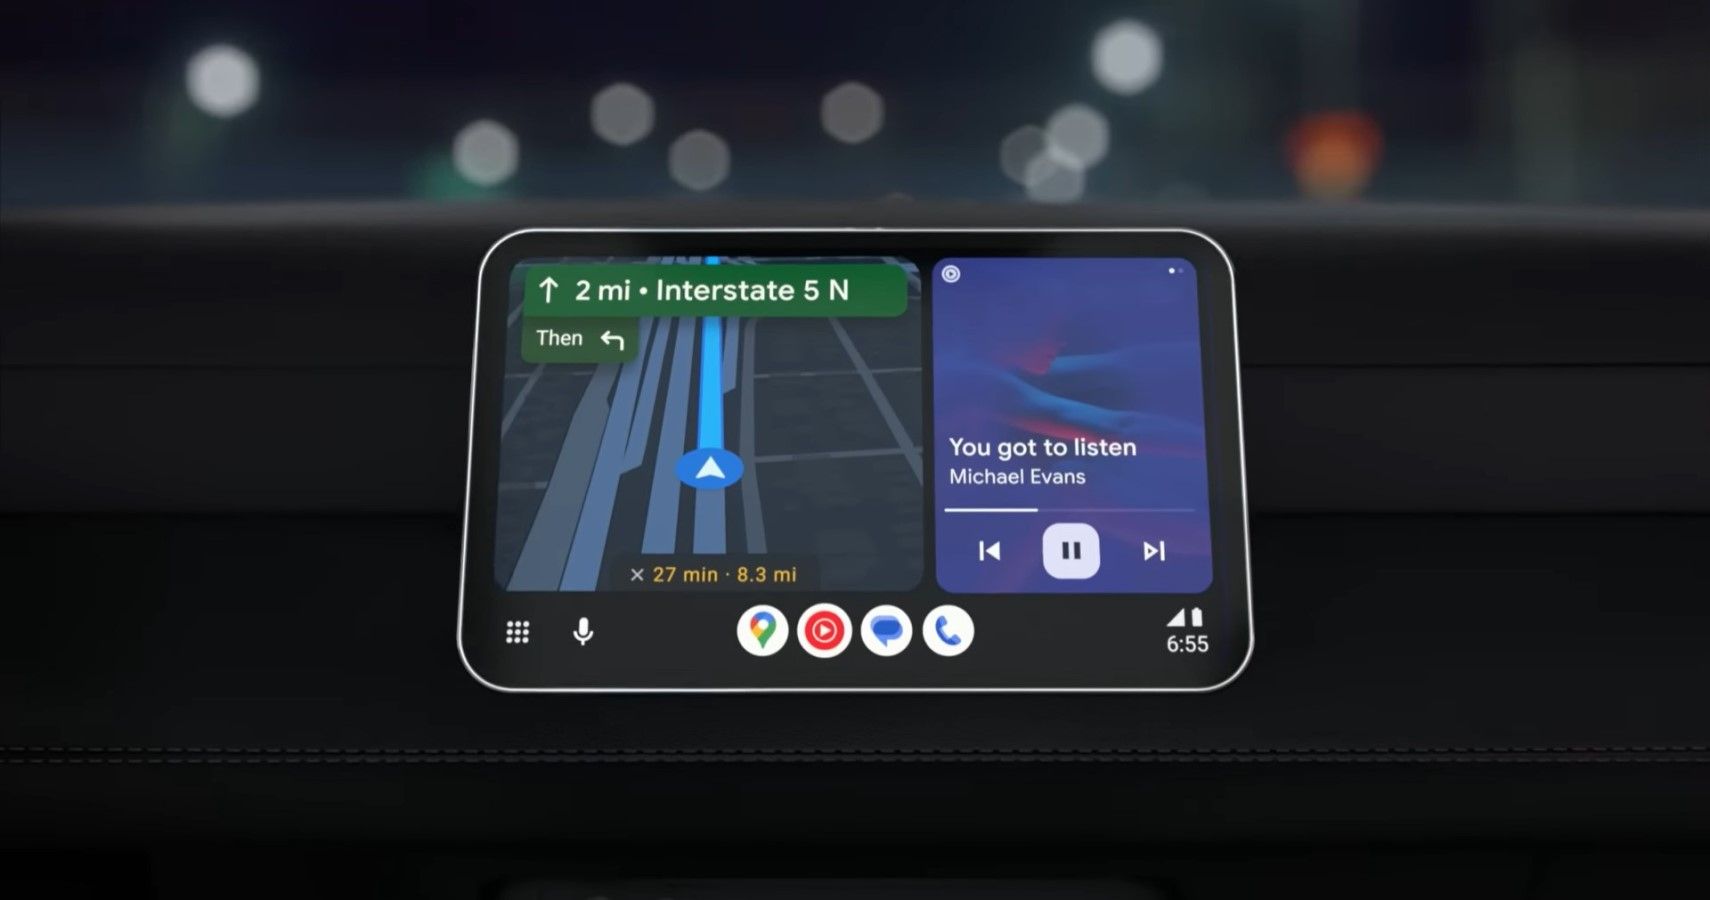 All-new Android Auto with a tall rectangular screen size